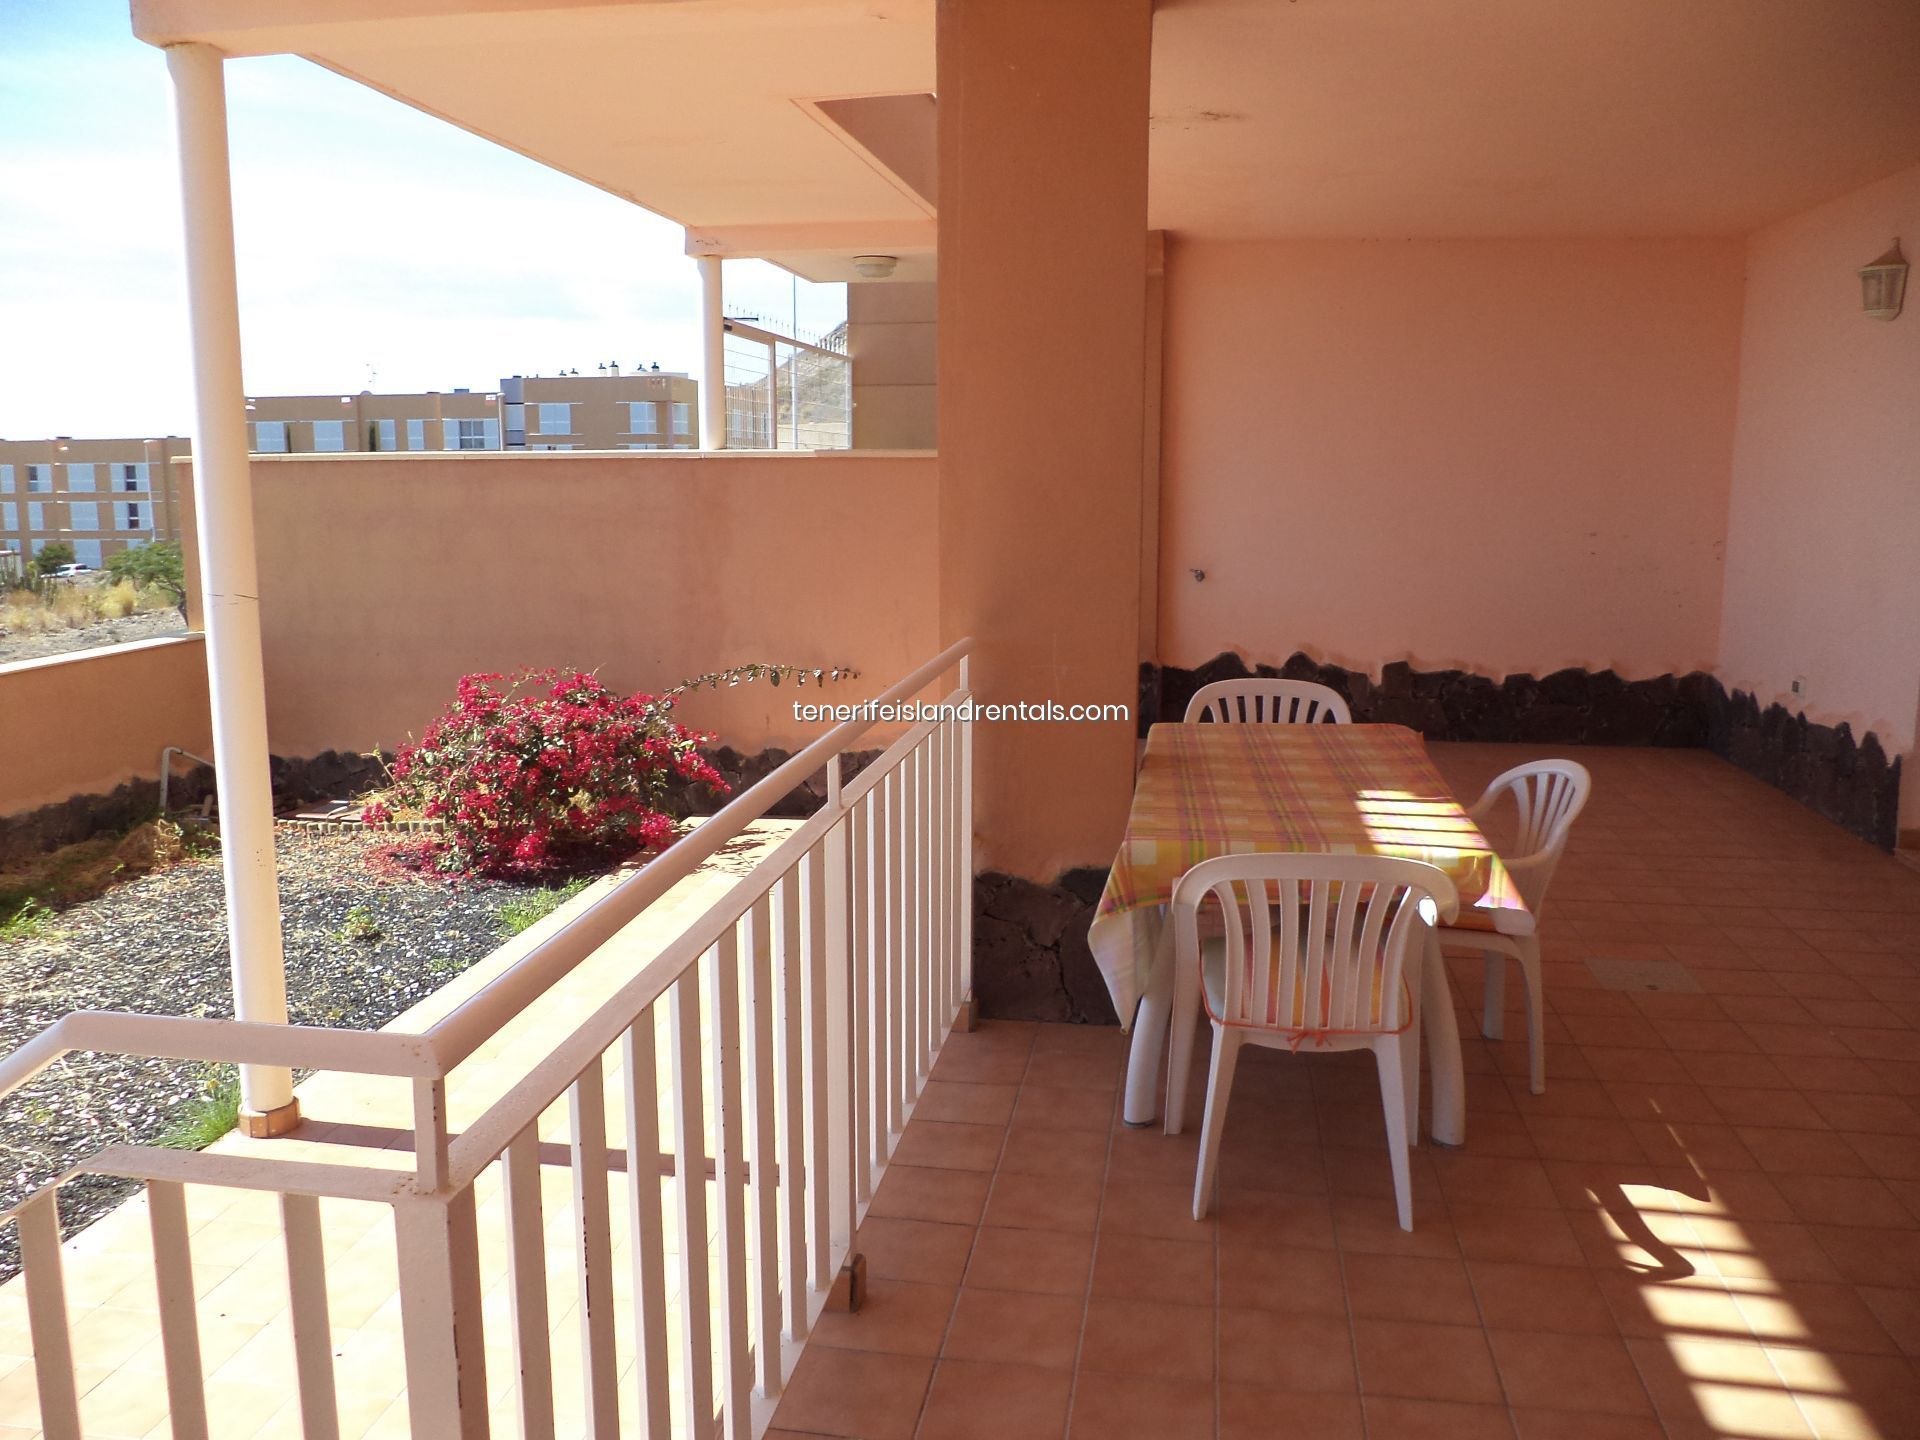 Apartment in El Madroñal marketed by Tenerife Island Rentals